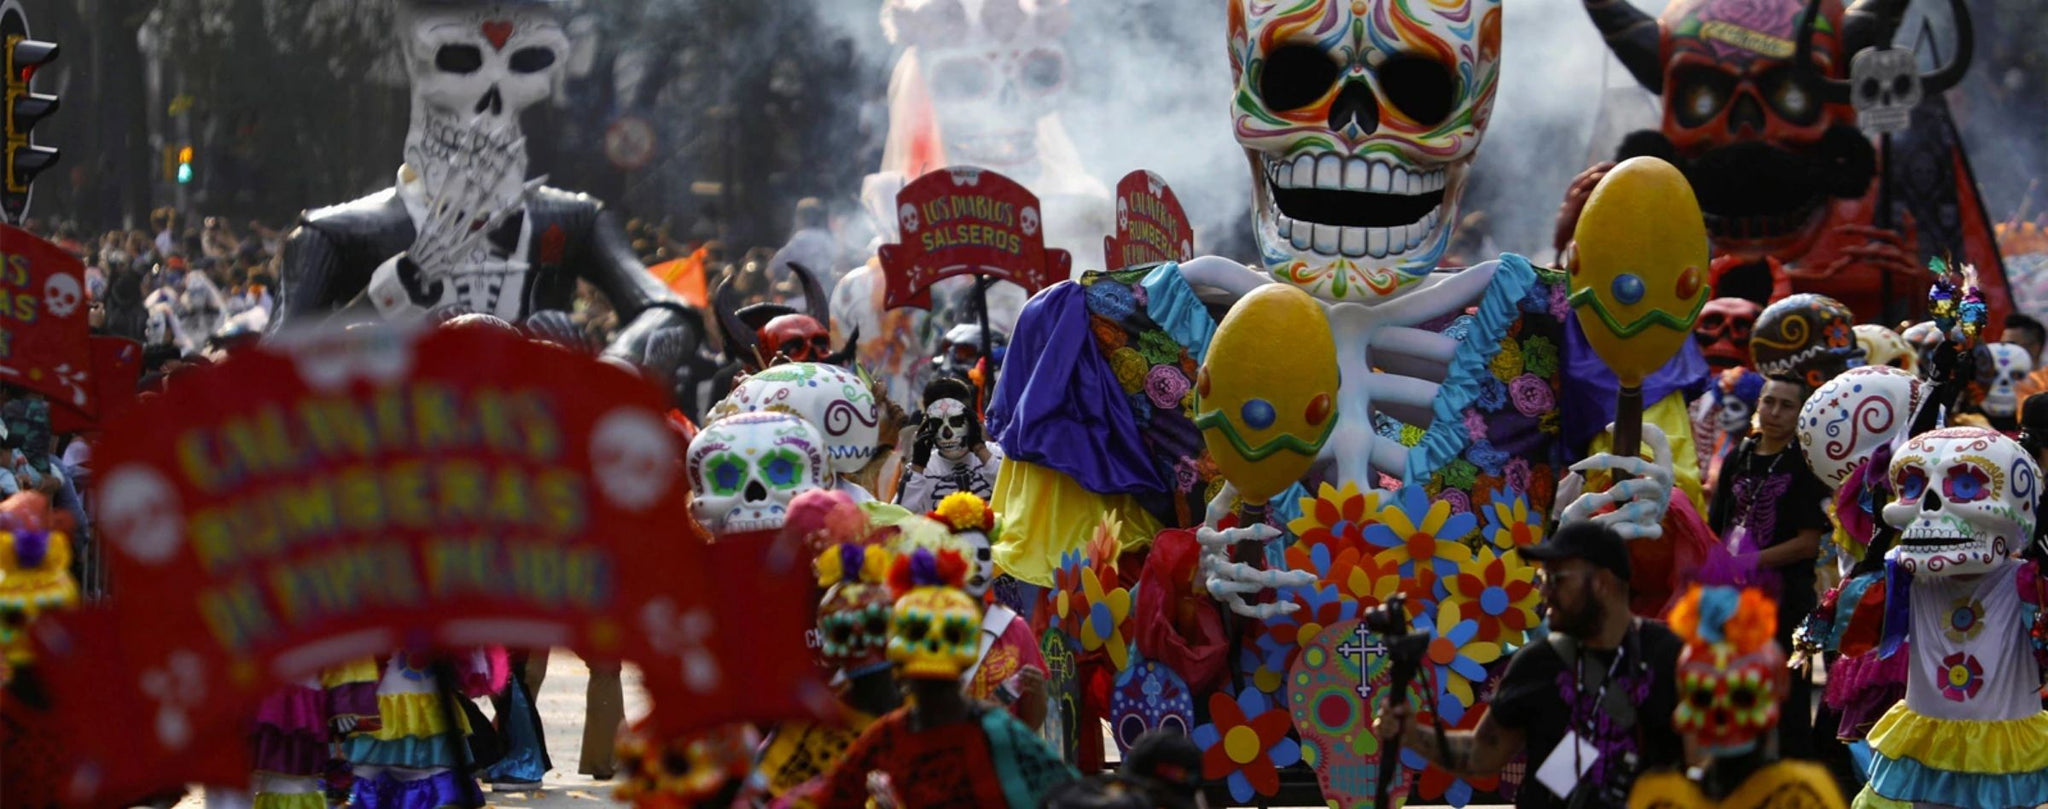 The celebrations of the Day of the Dead